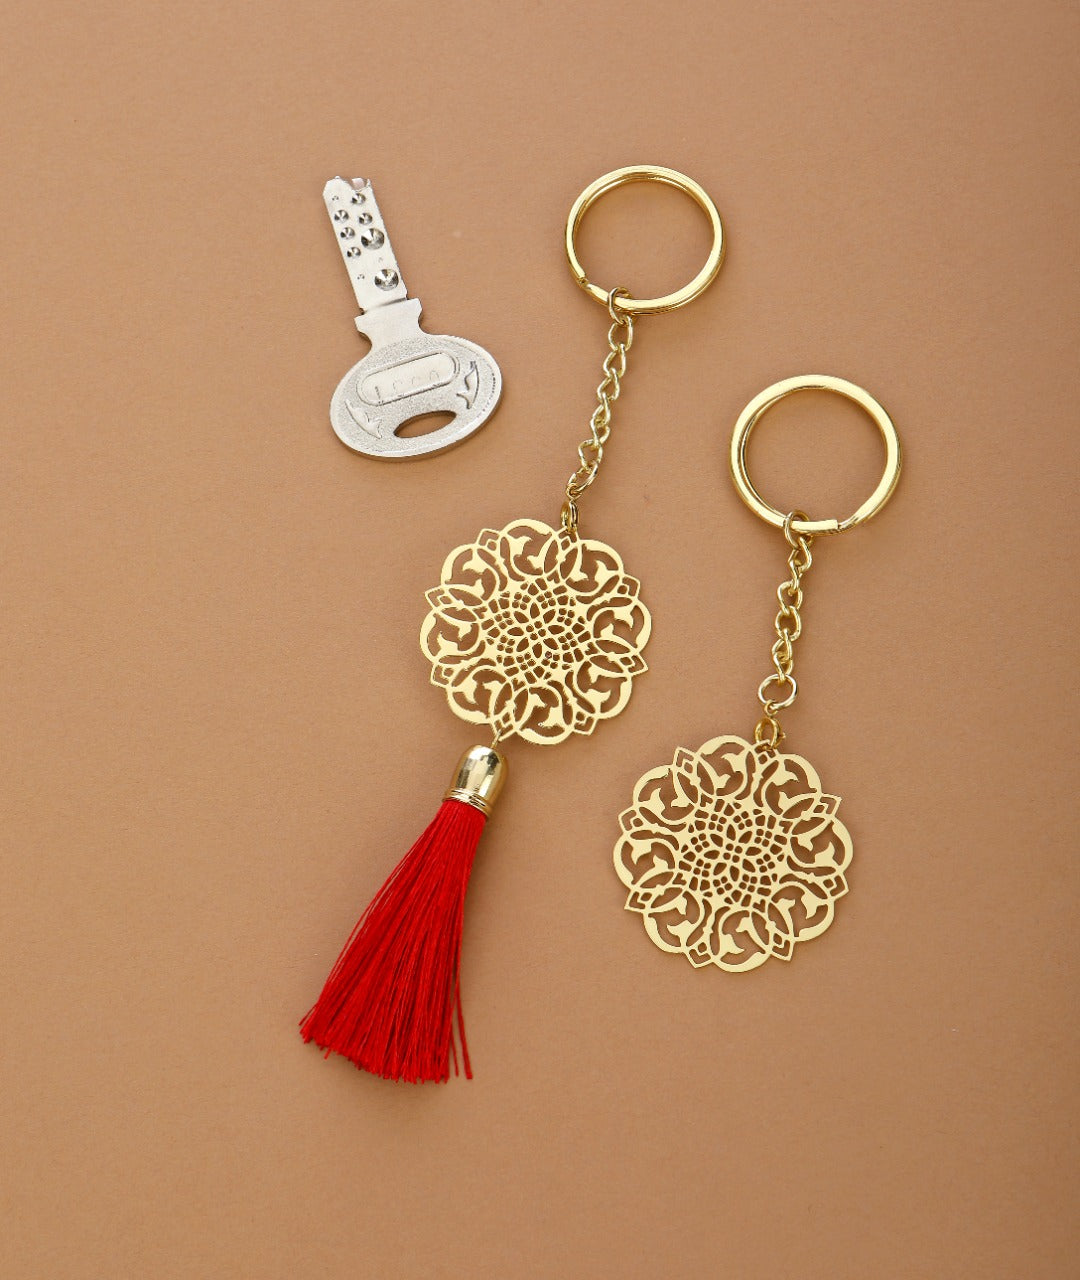 Jaali design Rakhi for bhabi with red hanging tassel cum keychain ring crafted in brass with golden finish